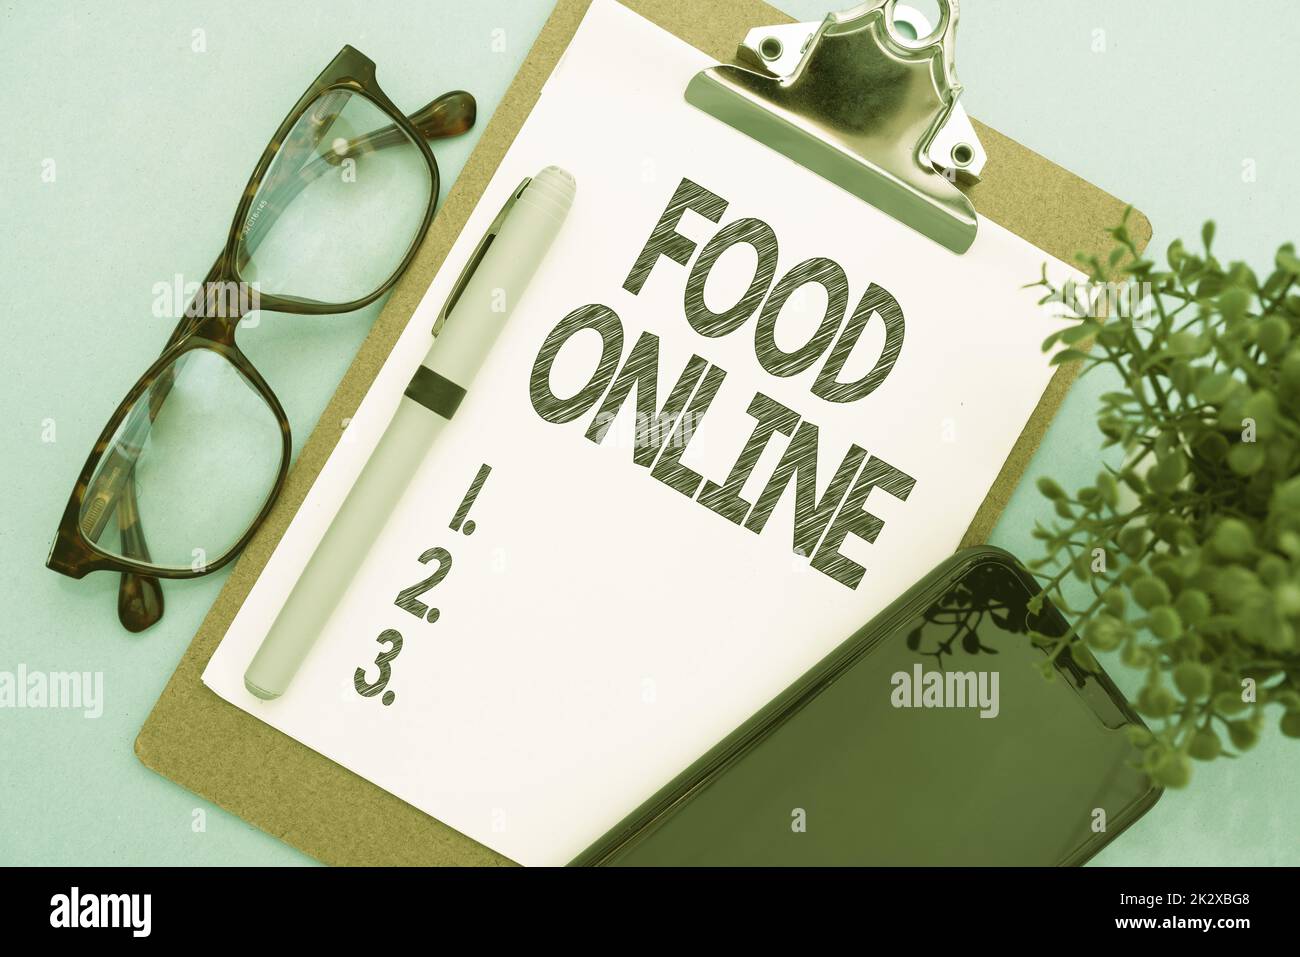 Sign displaying Food Online. Word for asking for something to eat using phone app or website Flashy School Office Supplies, Teaching Learning Collections, Writing Tools Stock Photo